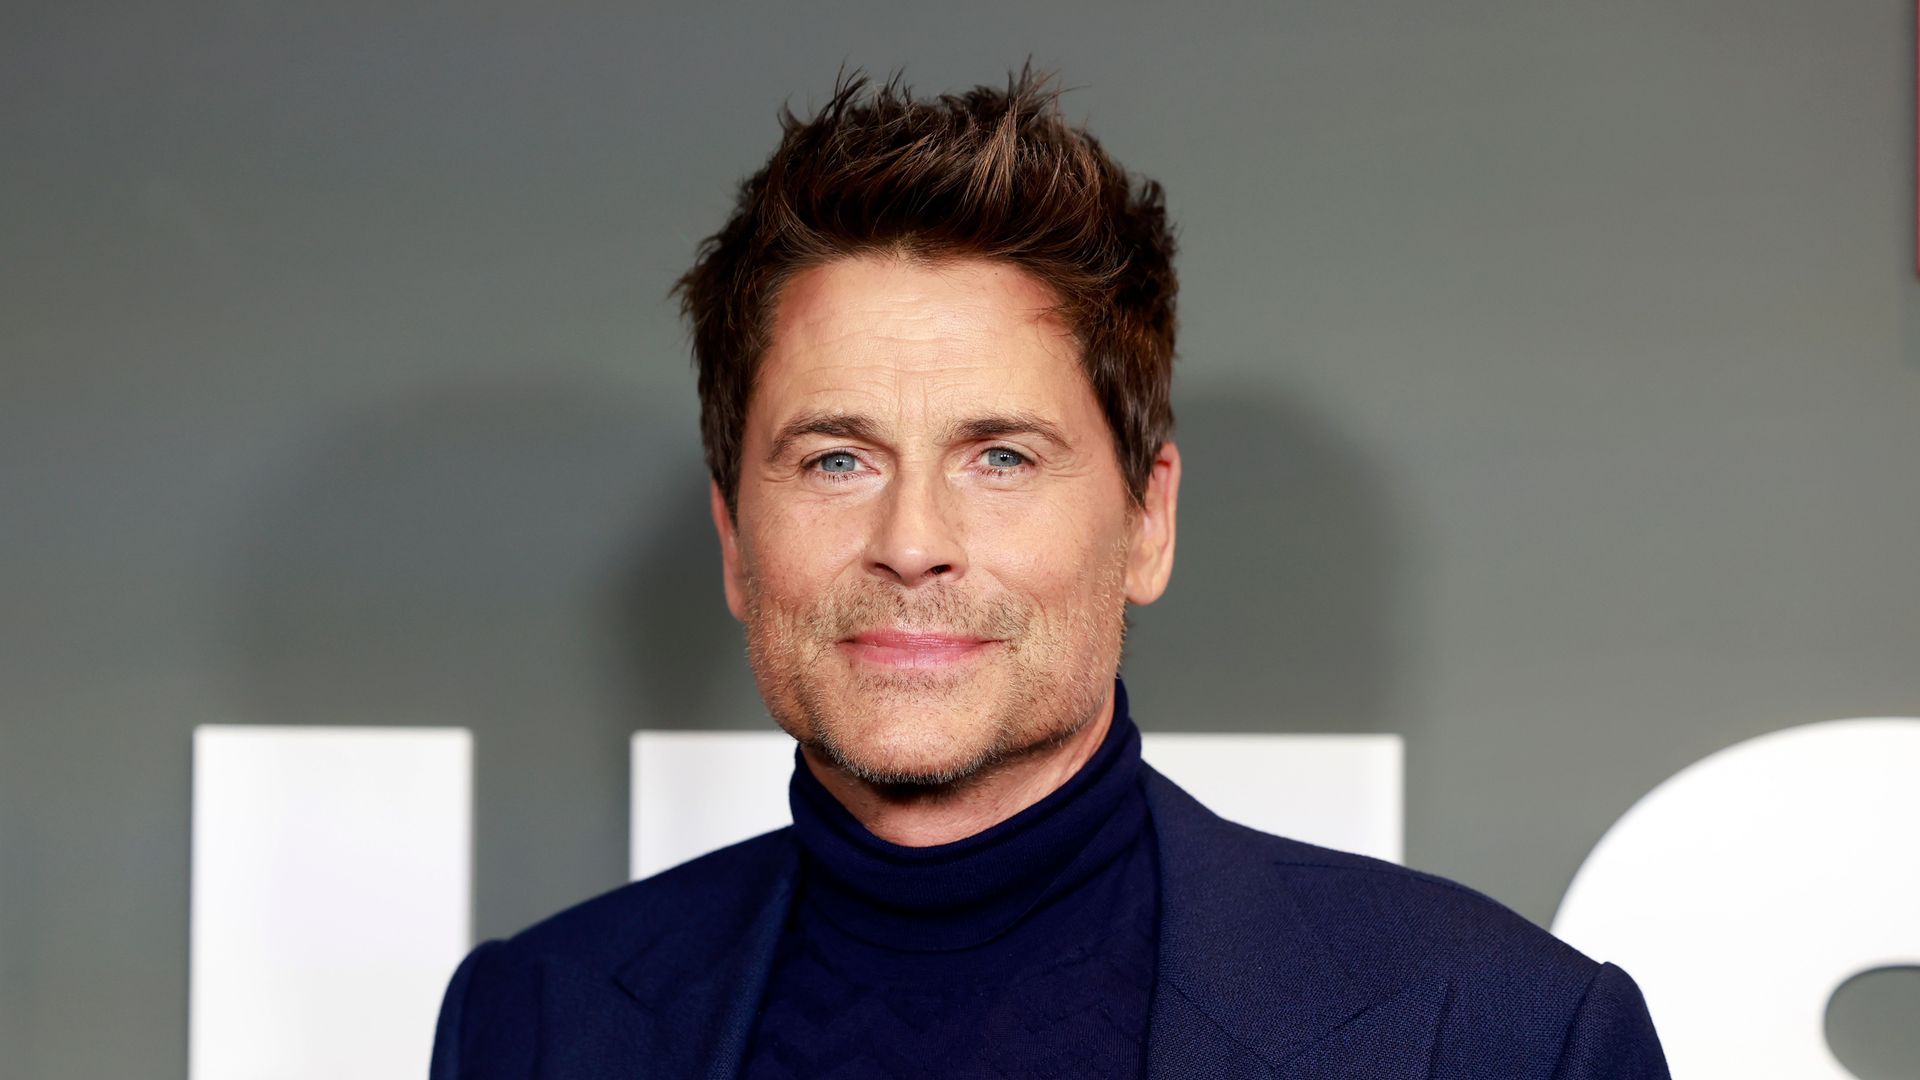 Rob Lowe attends the Los Angeles Premiere of Netflix's "Unstable" at TUDUM Theater on March 23, 2023 in Hollywood, California